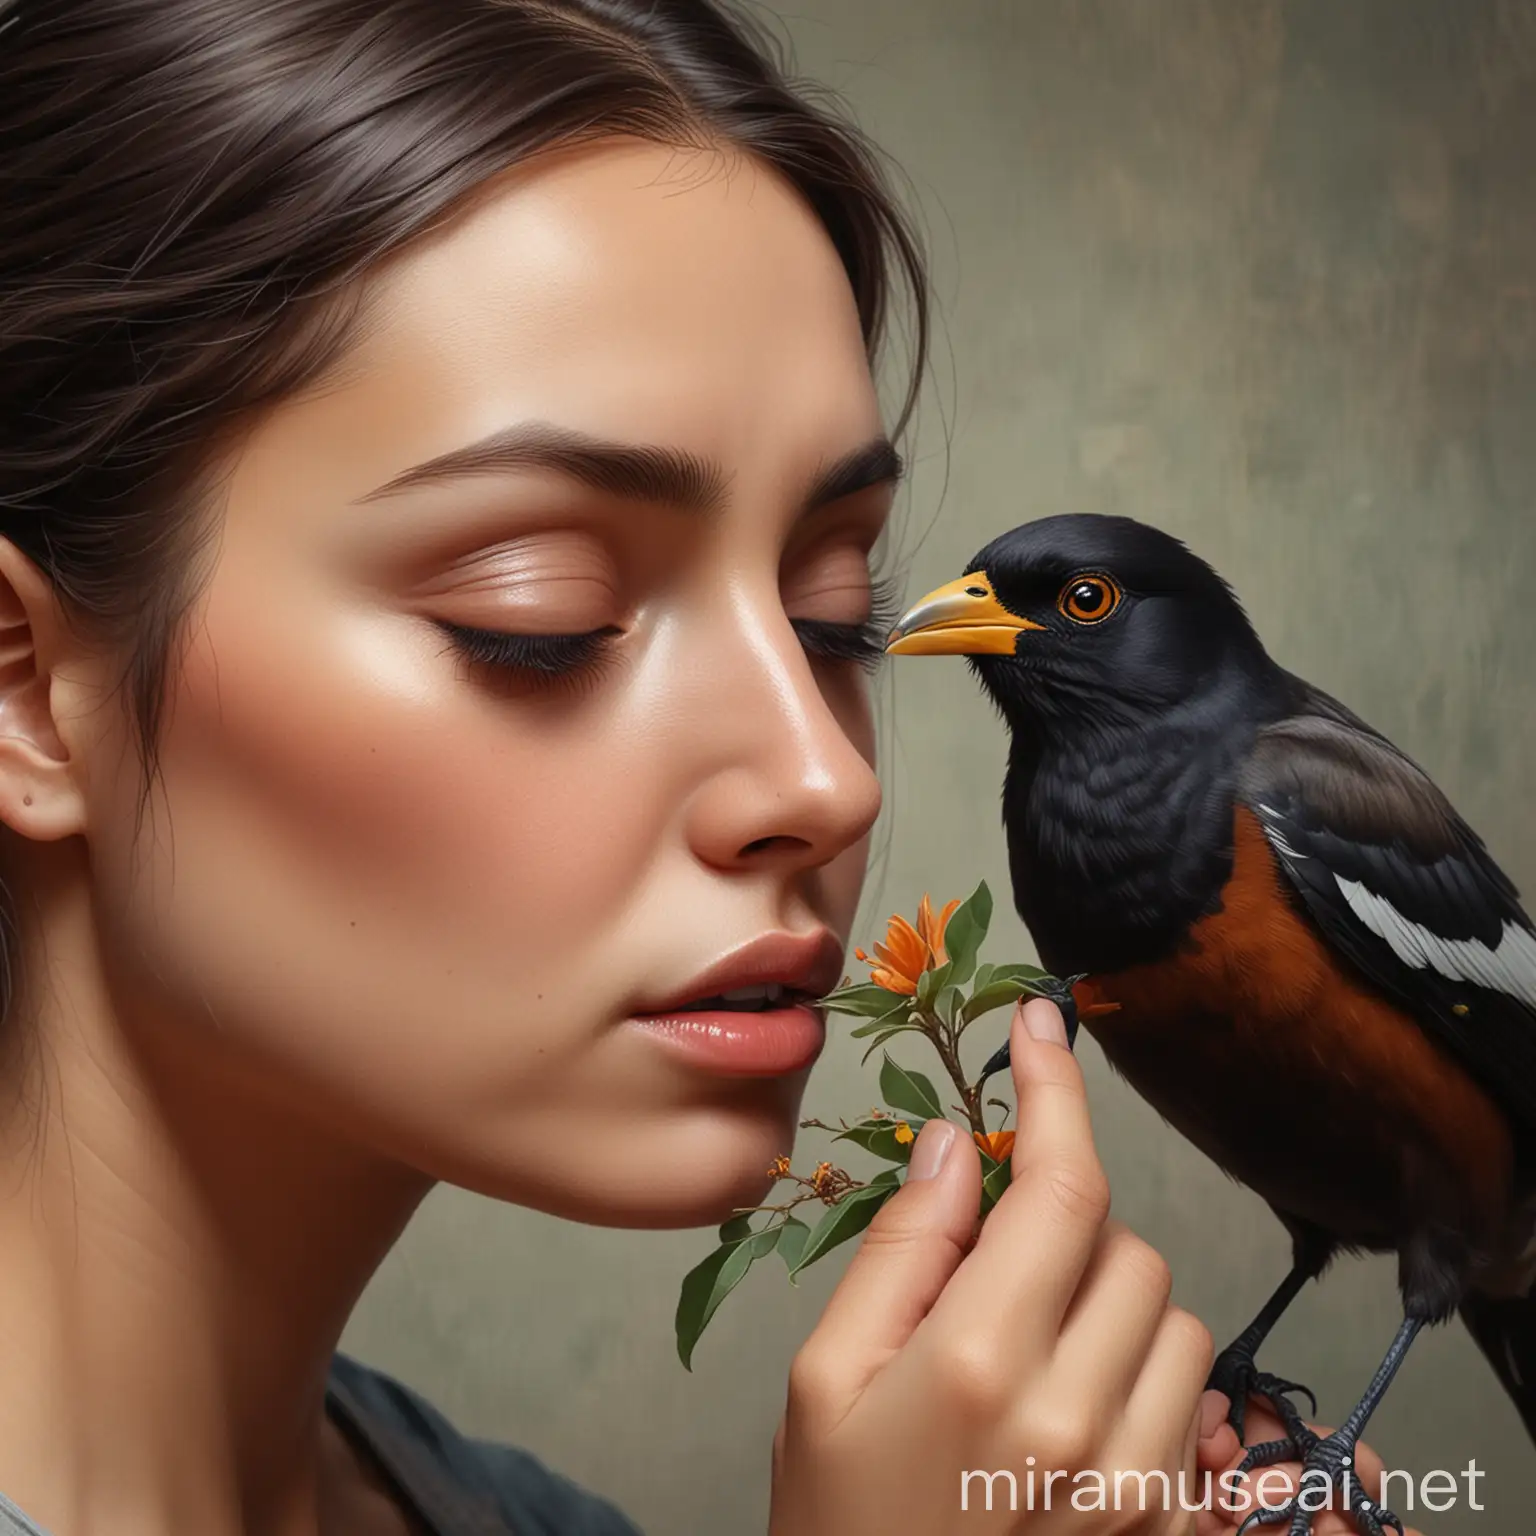 Create a hyperrealistic digital painting of a scene in which a woman gently holds one of her eyes open with her finger.  Beside him, a myna bird with a flower curled into its beak leans towards his eye, its beak open as if ready to look inside.